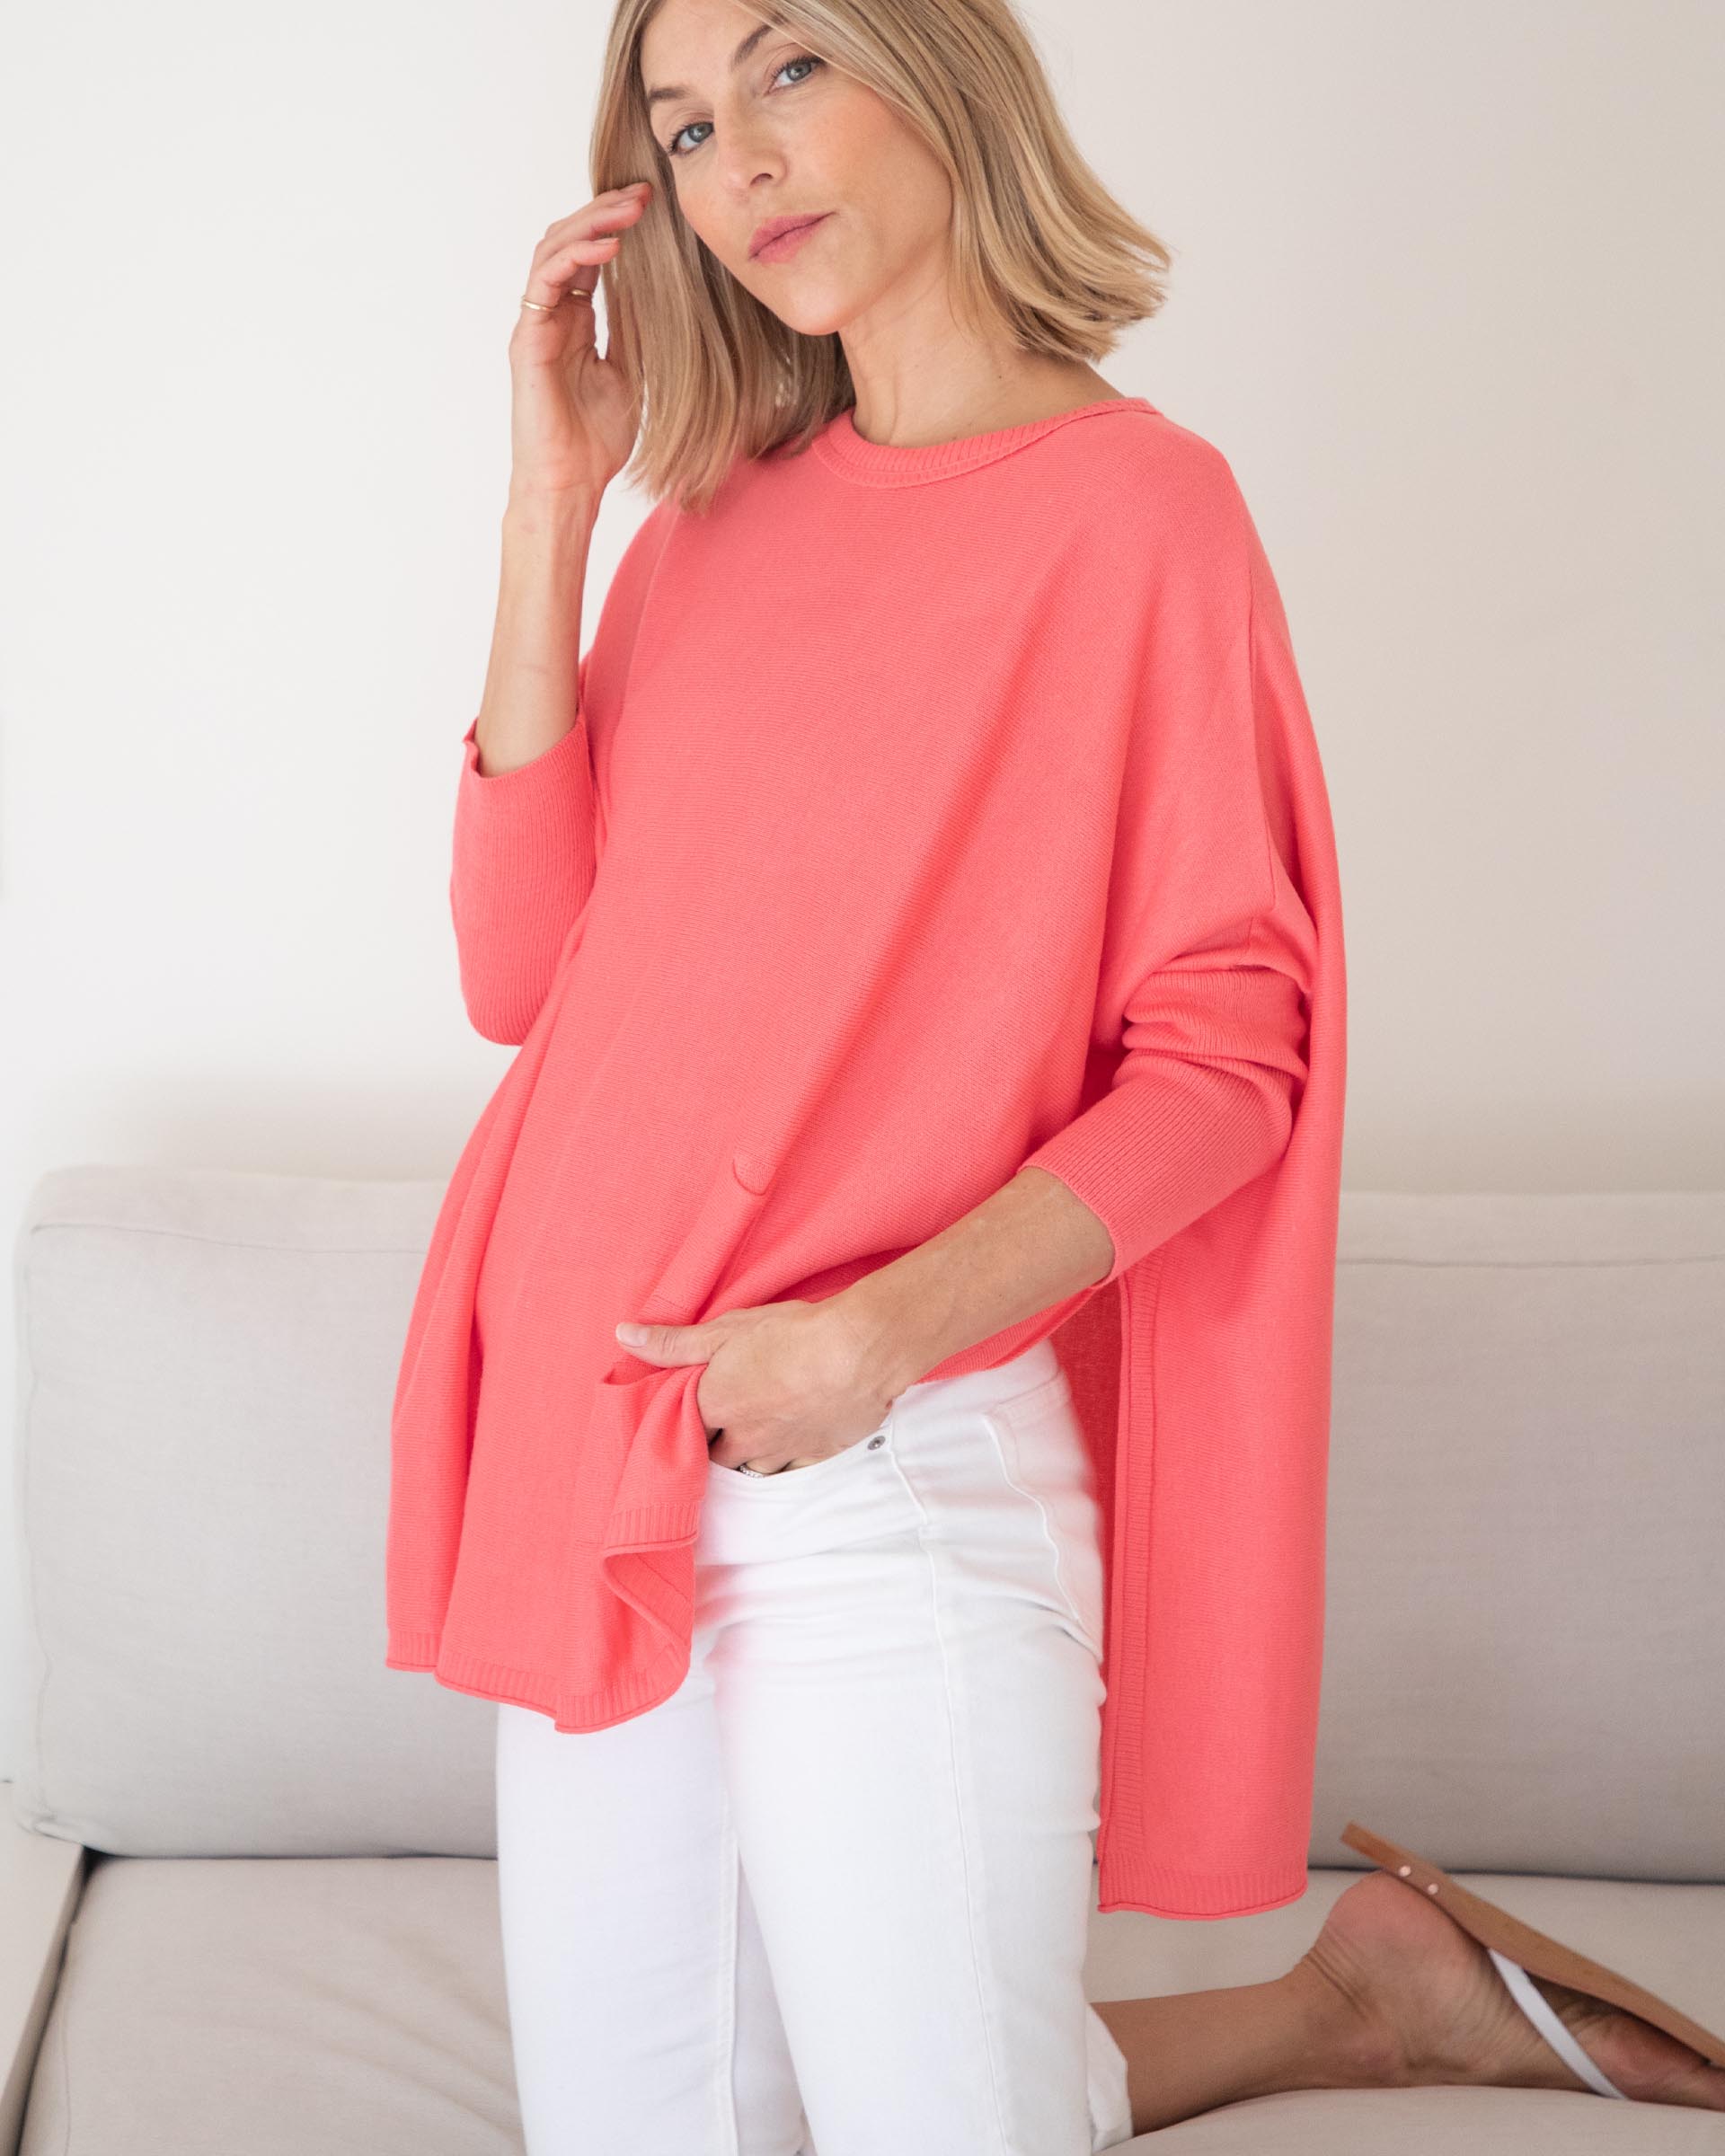 Women's Oversized Crewneck Knit Sweater in Coral Pink Side View of Side Slits